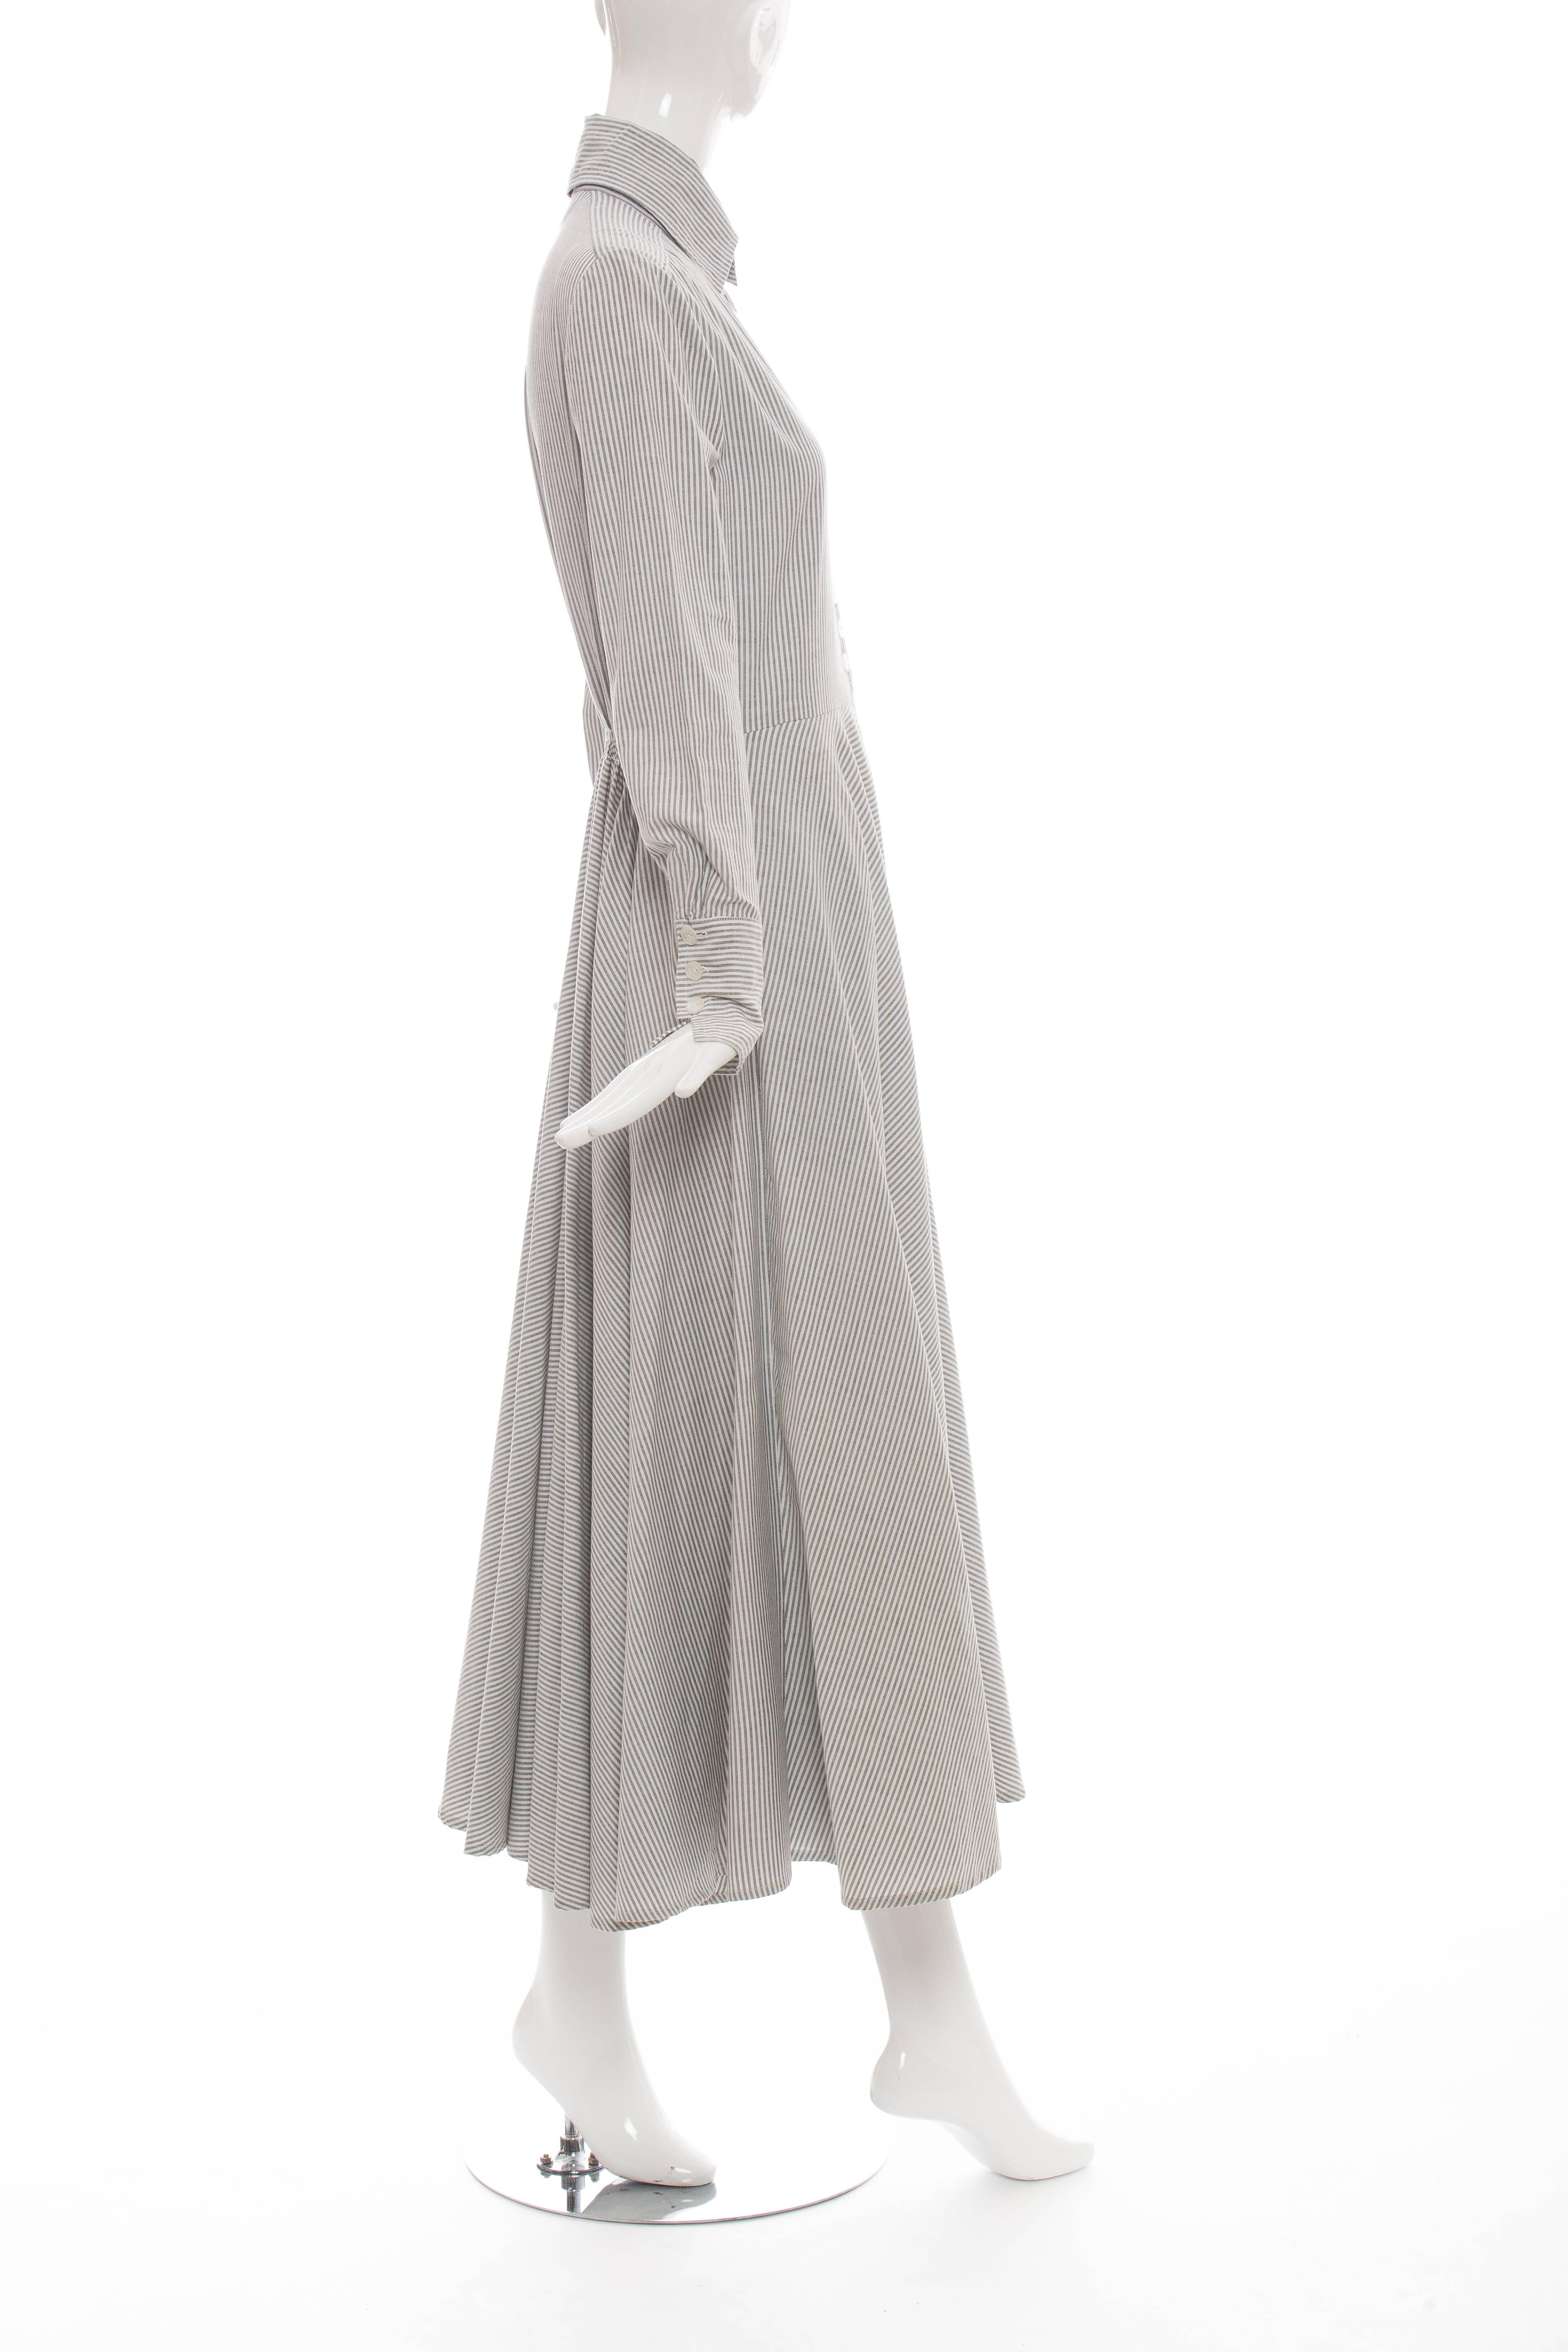 Norma Kamali Mother Of Pearl Button Front Cotton Dress, Circa 1980s 2